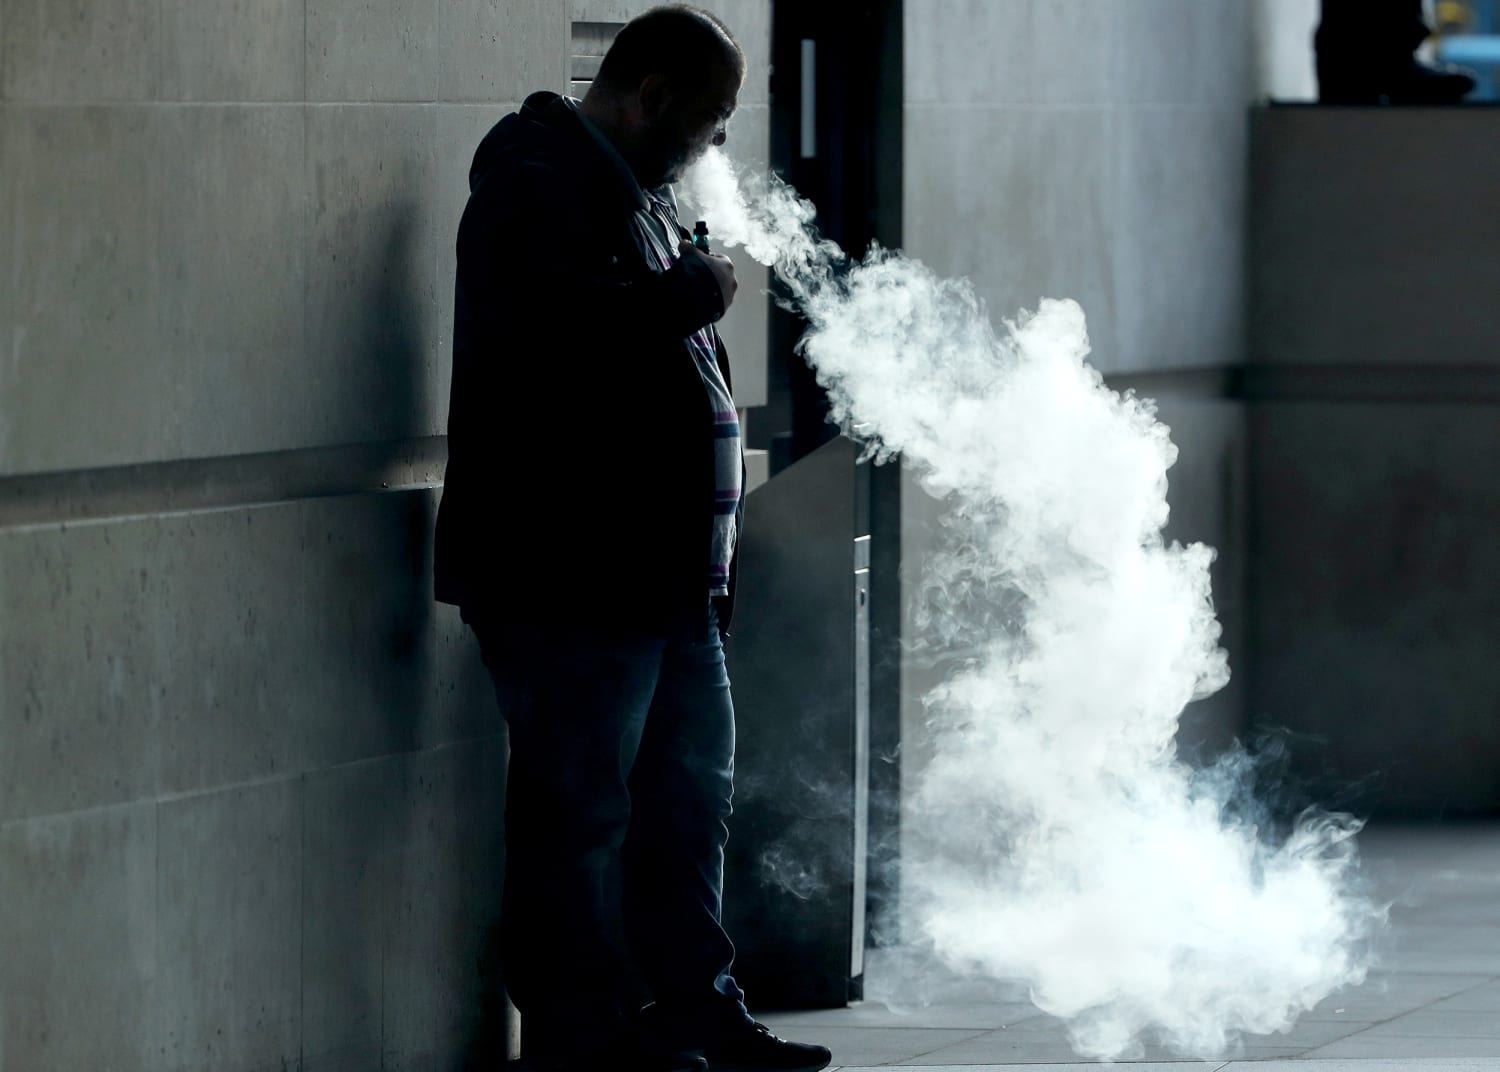 Will vaping bans do more harm than good? Some public health experts say yes.